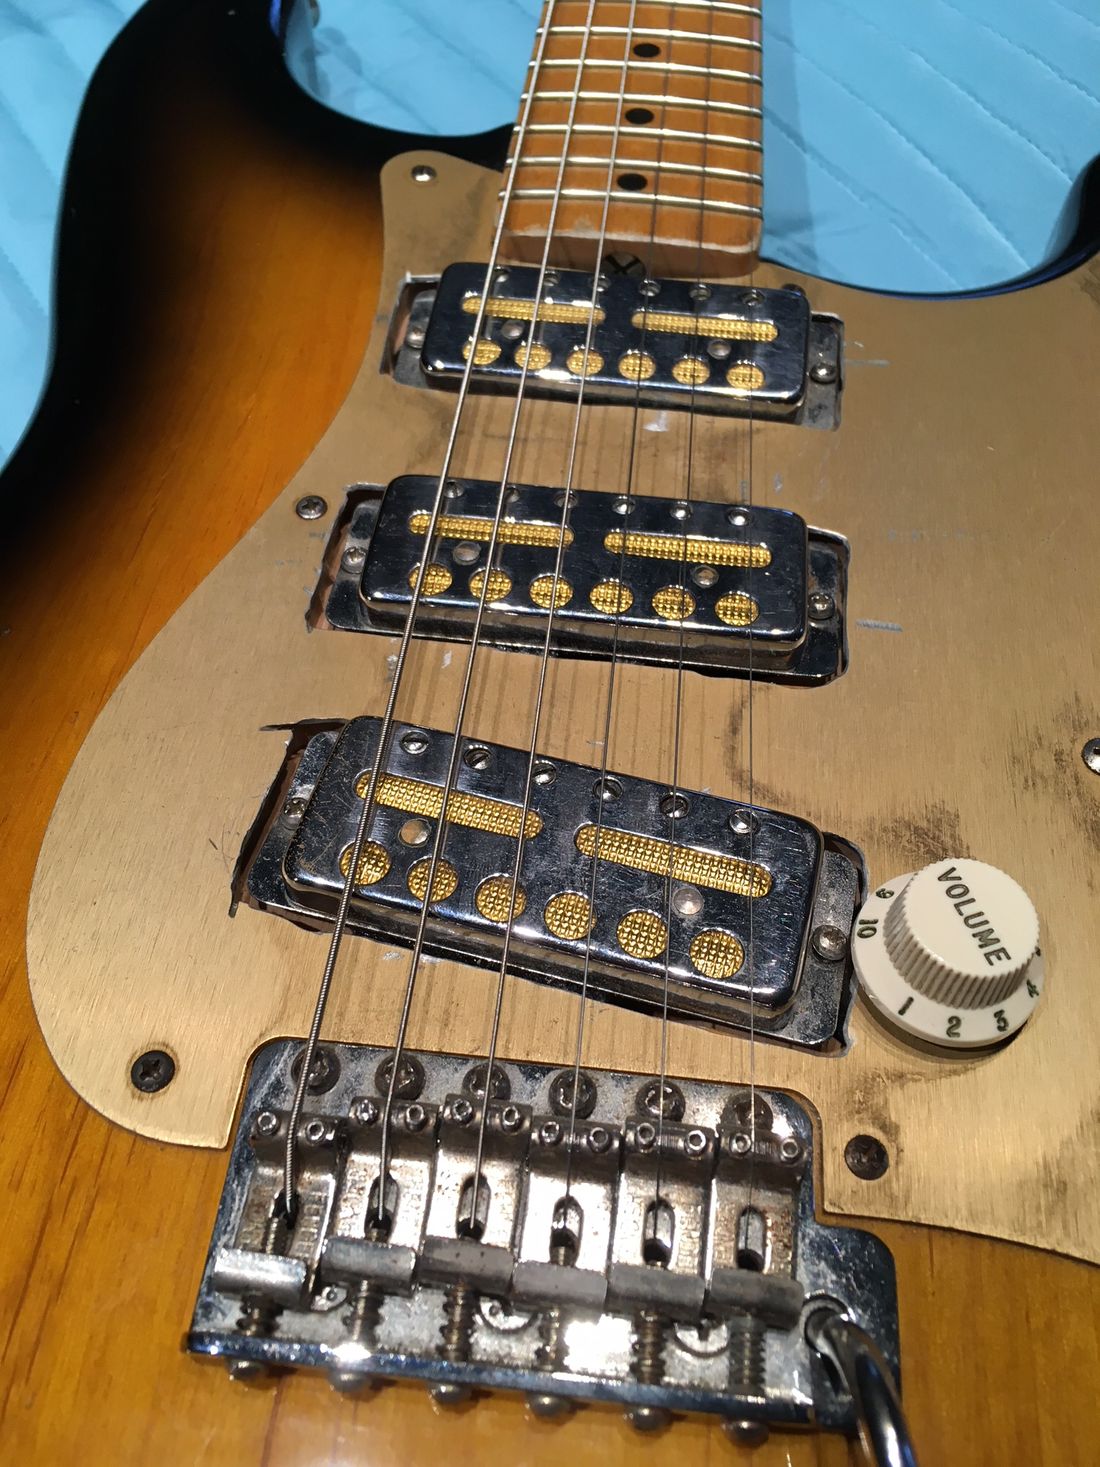 1964 Teisco Del Rey pickups given to me by Billy F. Gibbons.
